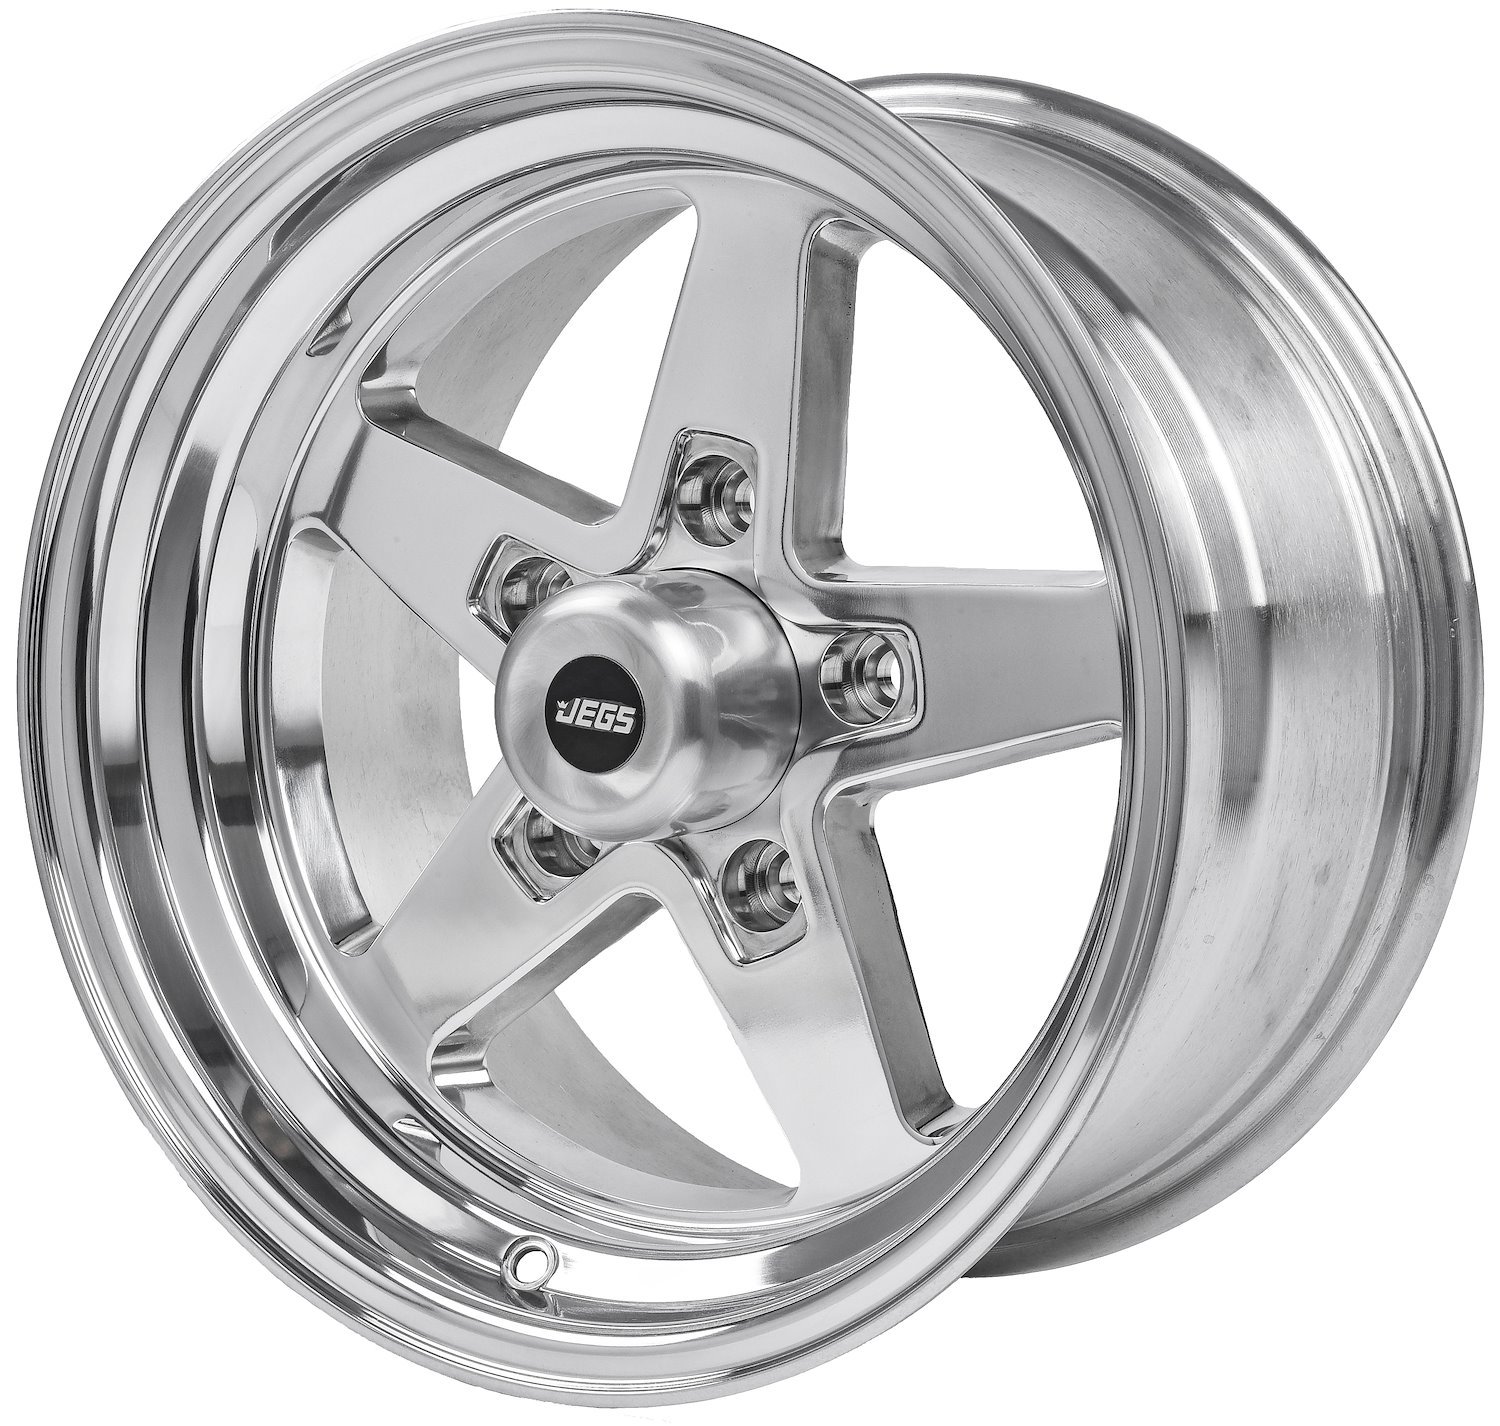 JEGS 681276: SSR Star Wheel [15" x 8"] | Bolt Pattern: 5 x 5.00" | Polished  | Includes center cap | DOT Approved | Back Spacing: 4.5" | Offset: 0 mm |  Each - JEGS